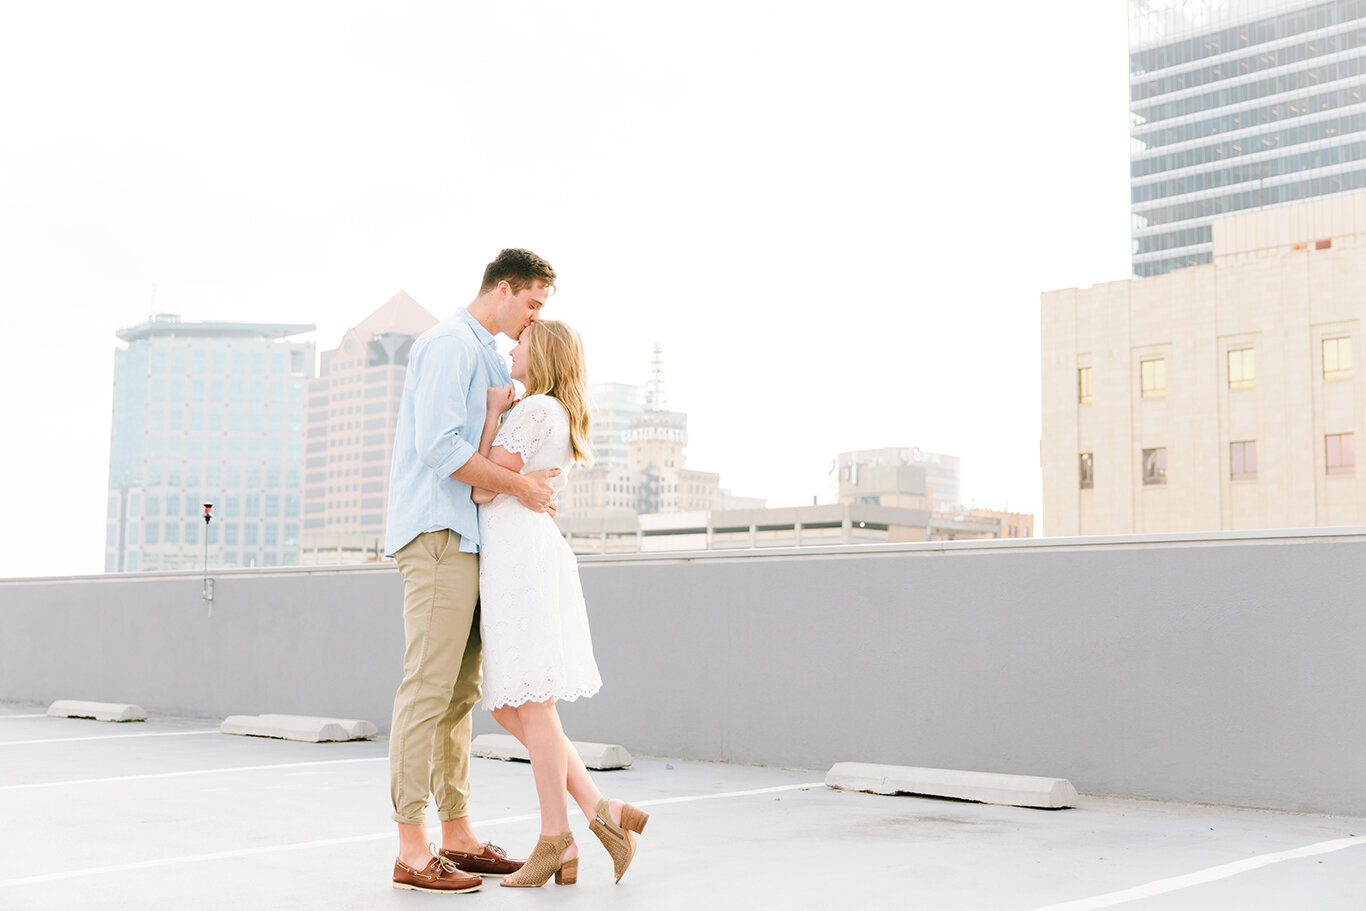  rooftop engagement photo session kiss on the forehead downtown engagement shoot light blue collared casual shirt white lace short sleeve dress loose hanging curls salt lake city utah professional utah valley engagement photographer #downtownsaltlake